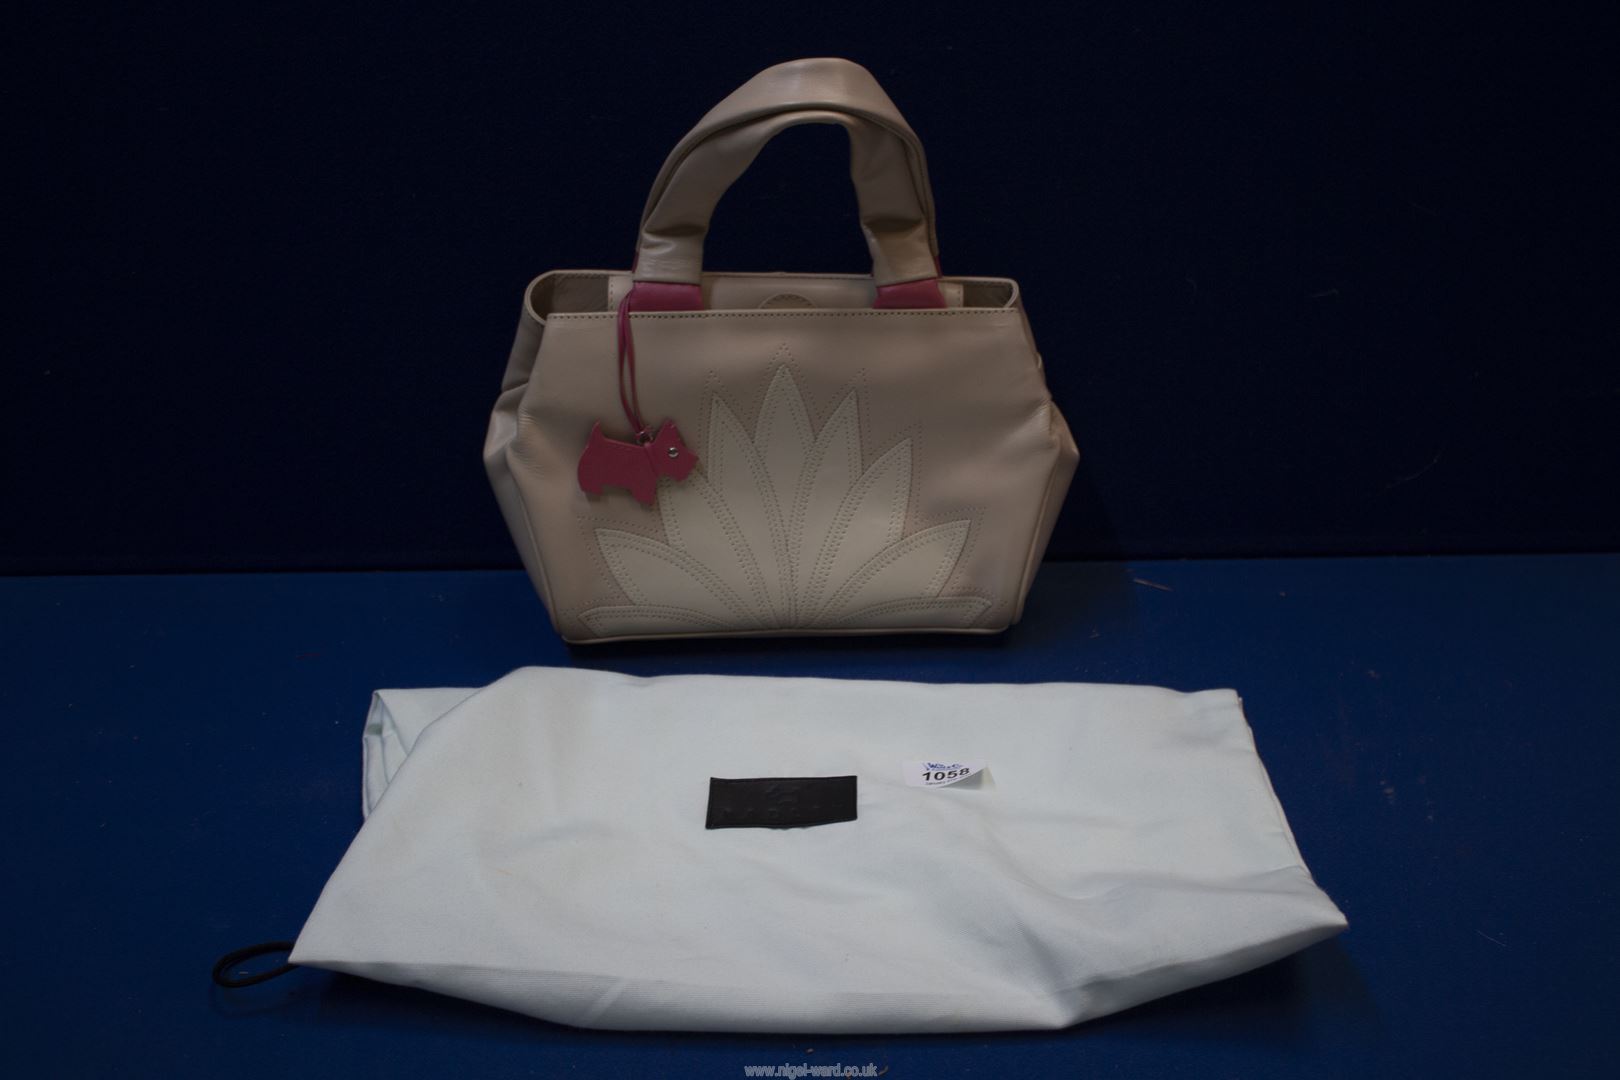 A Radley pale pink and cream Handbag with lotus pattern, with dust cover bag.